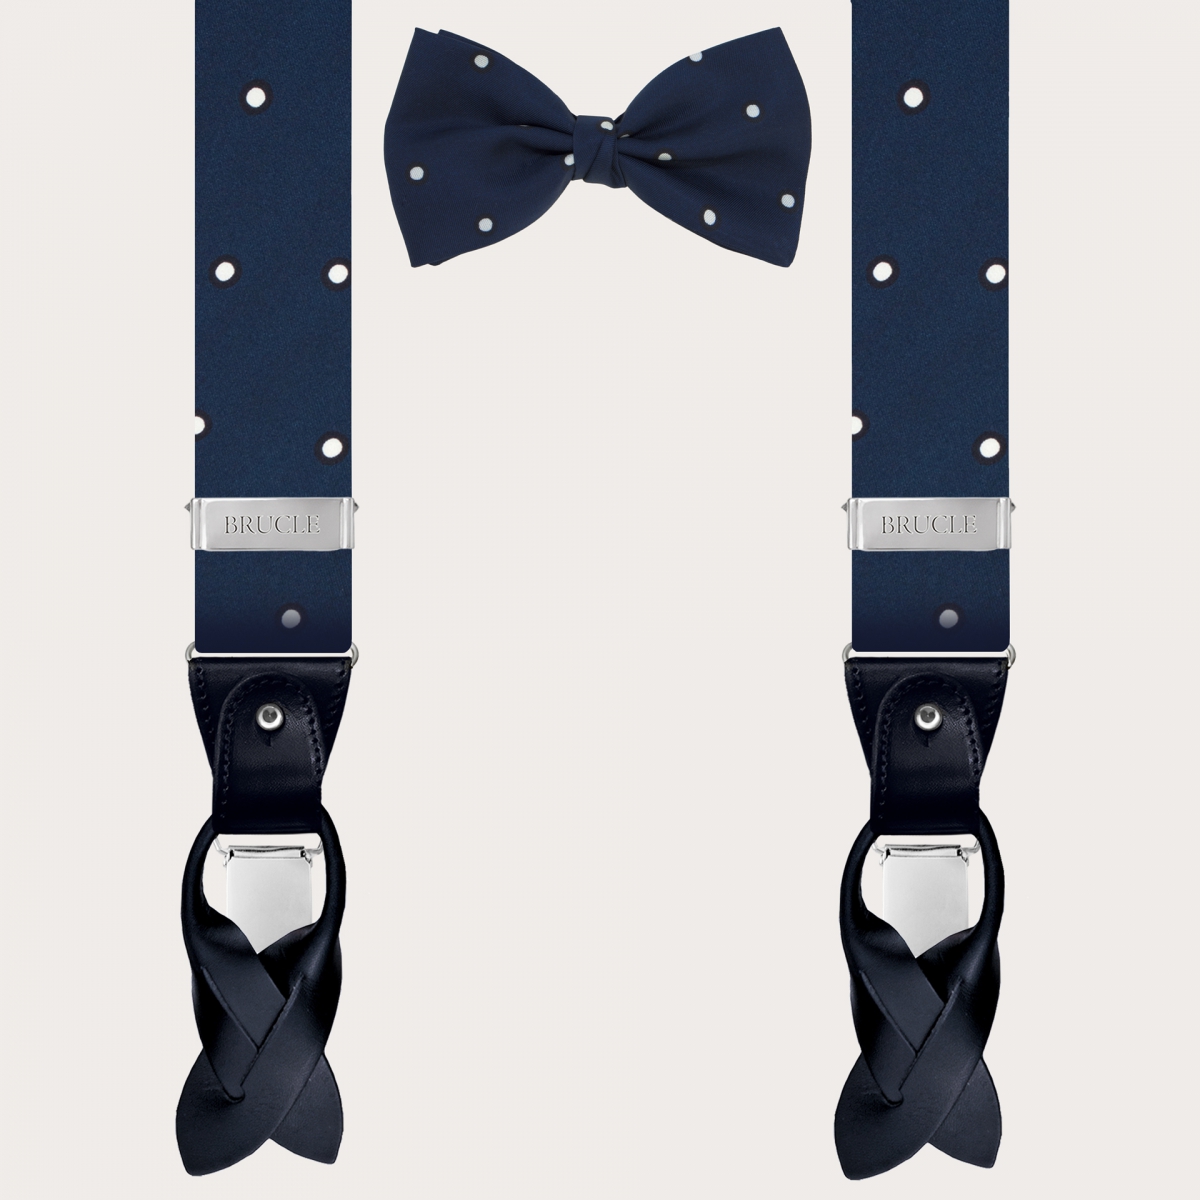 BRUCLE Set of suspenders and bow tie in blue silk with white polka dot pattern